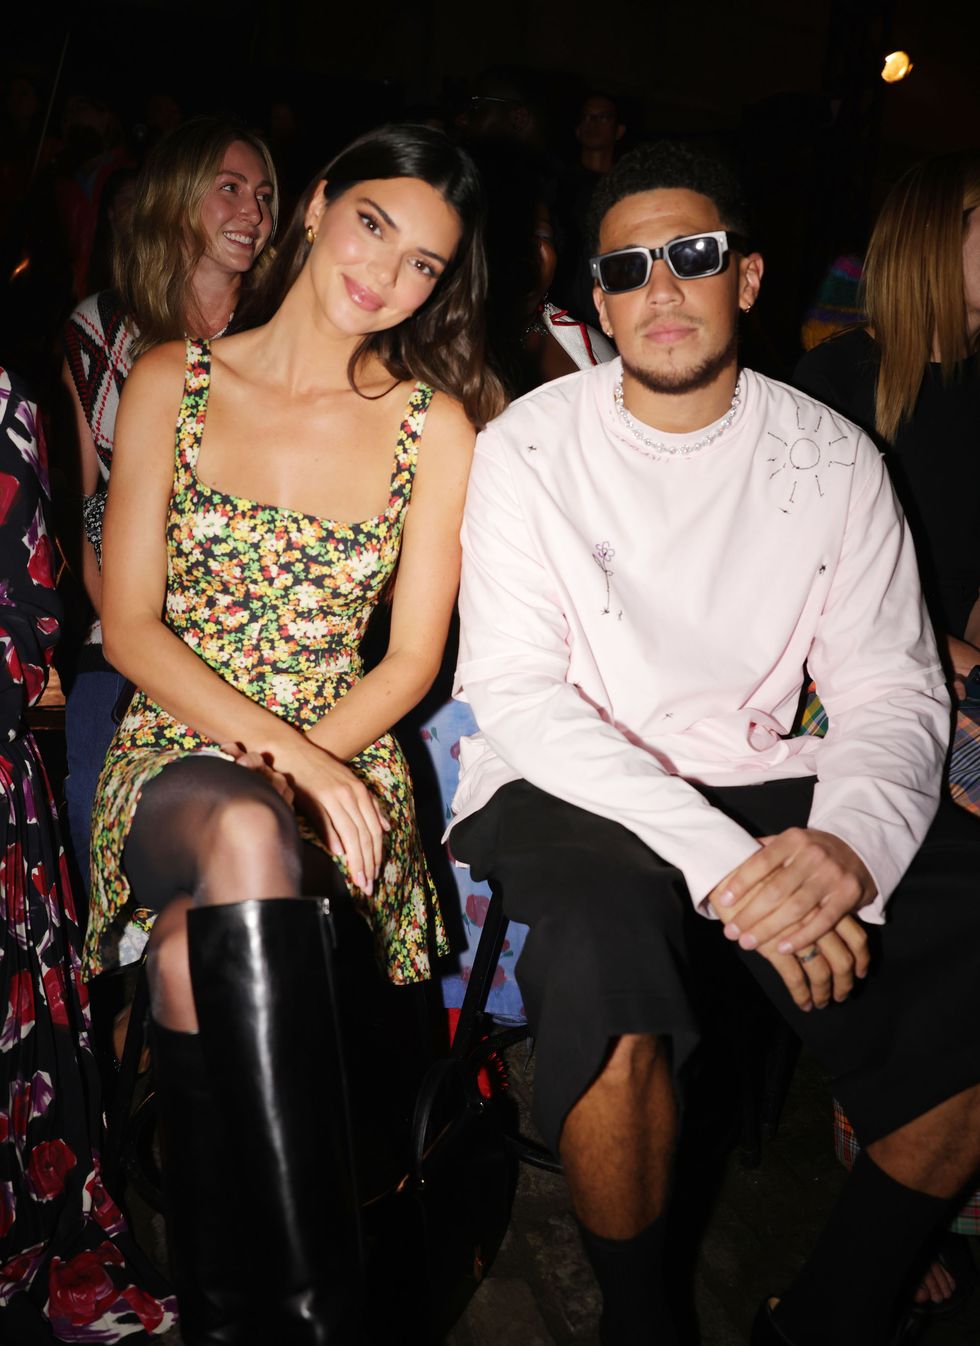 kendall jenner and devin booker at the marni spring 2023 ready to wear runway show front row on september 10, 2022 in brooklyn, new york photo by fairchild archivewwd via getty images